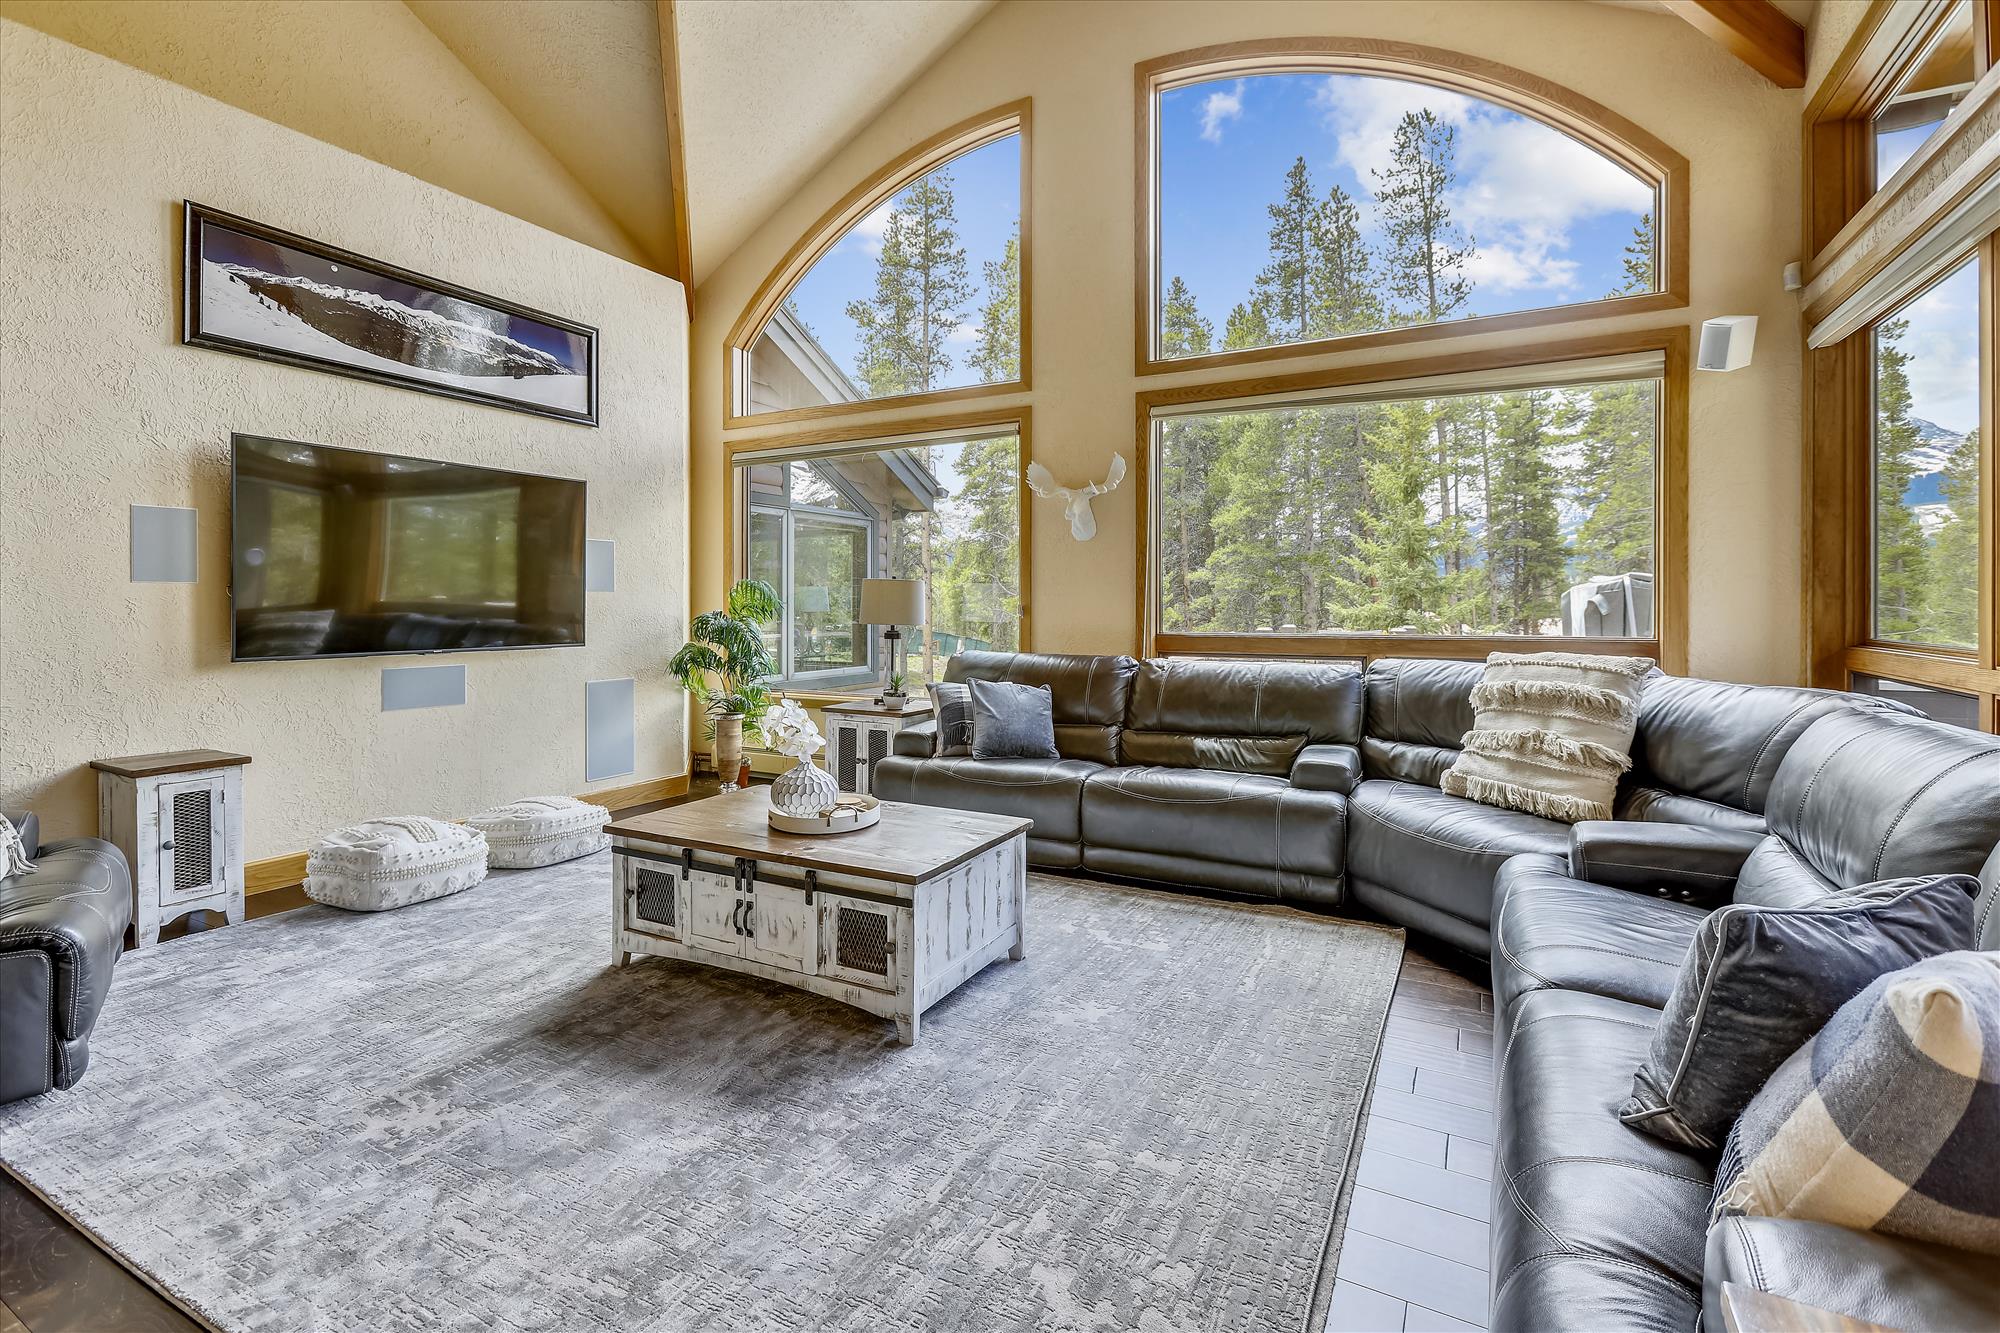 Have a relaxing movie night with family and friends in this spacious living room - Evergreen Lodge Breckenridge Vacation Rental